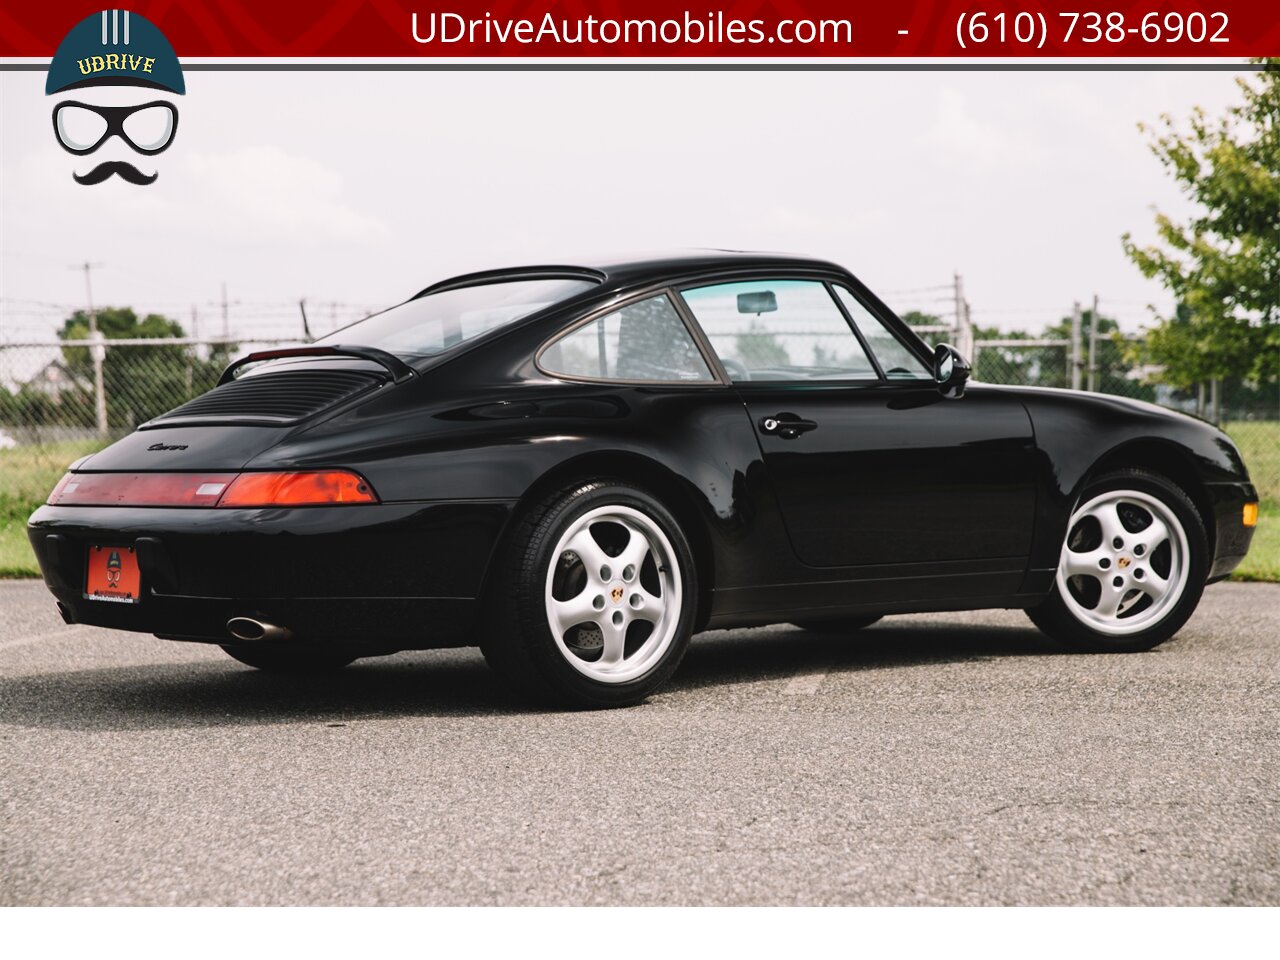 1995 Porsche 911 993 Carrera 6 Speed 16k Miles Service History  Black over Black Spectacular Stock Example 1 Owner Clean Carfax - Photo 2 - West Chester, PA 19382